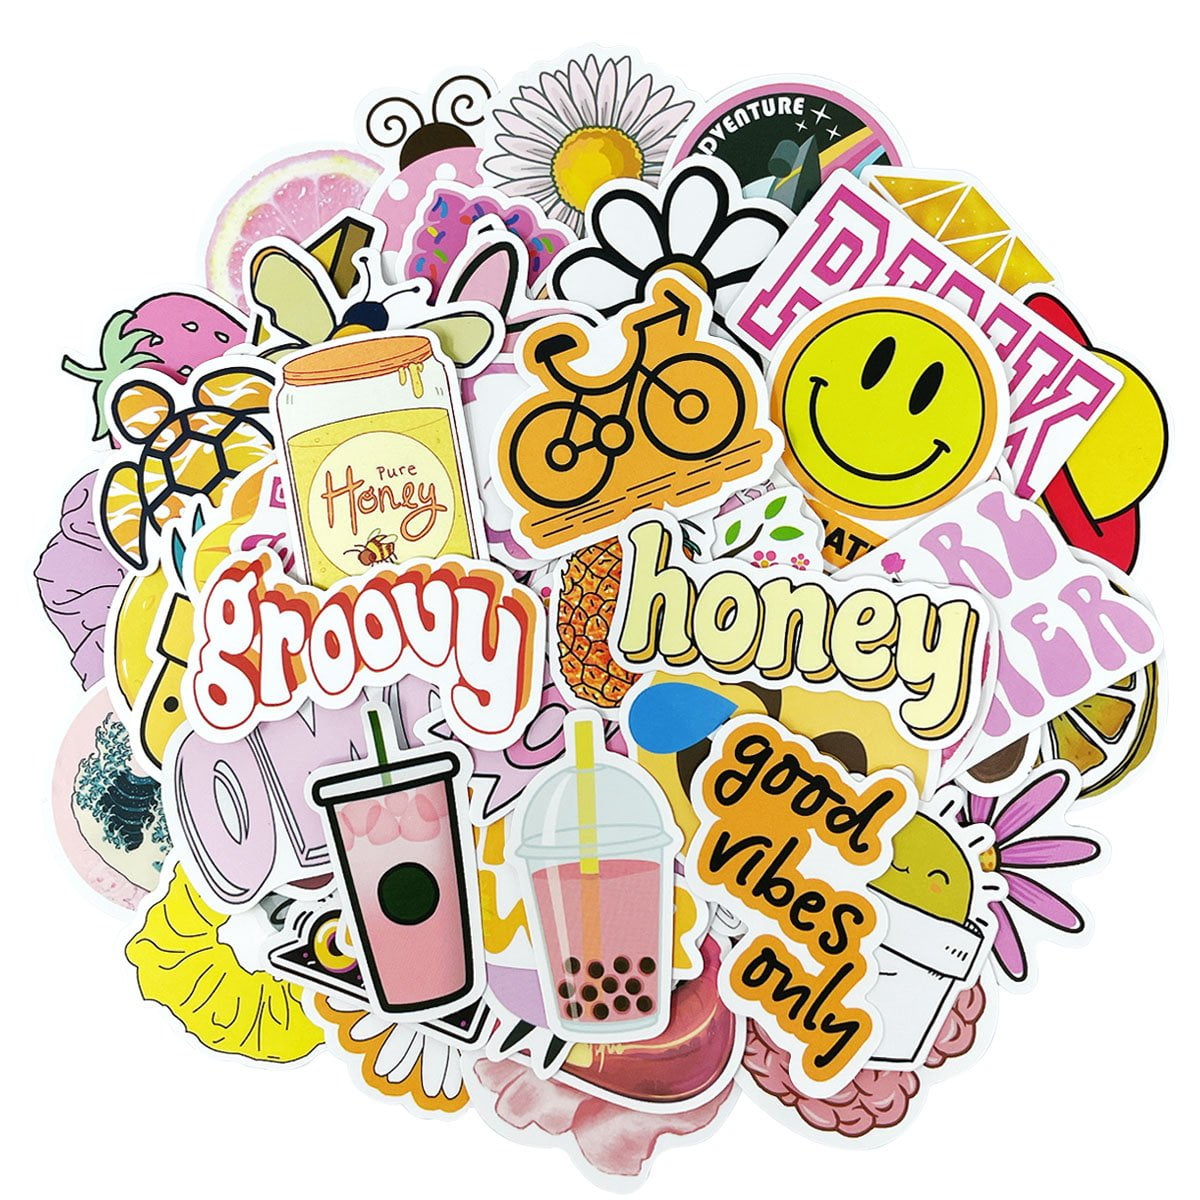 Wrapables Waterproof Vinyl Stickers for Water Bottles, Laptop, Phones, Skateboards, Decals for Teens 100pcs, Be Cool